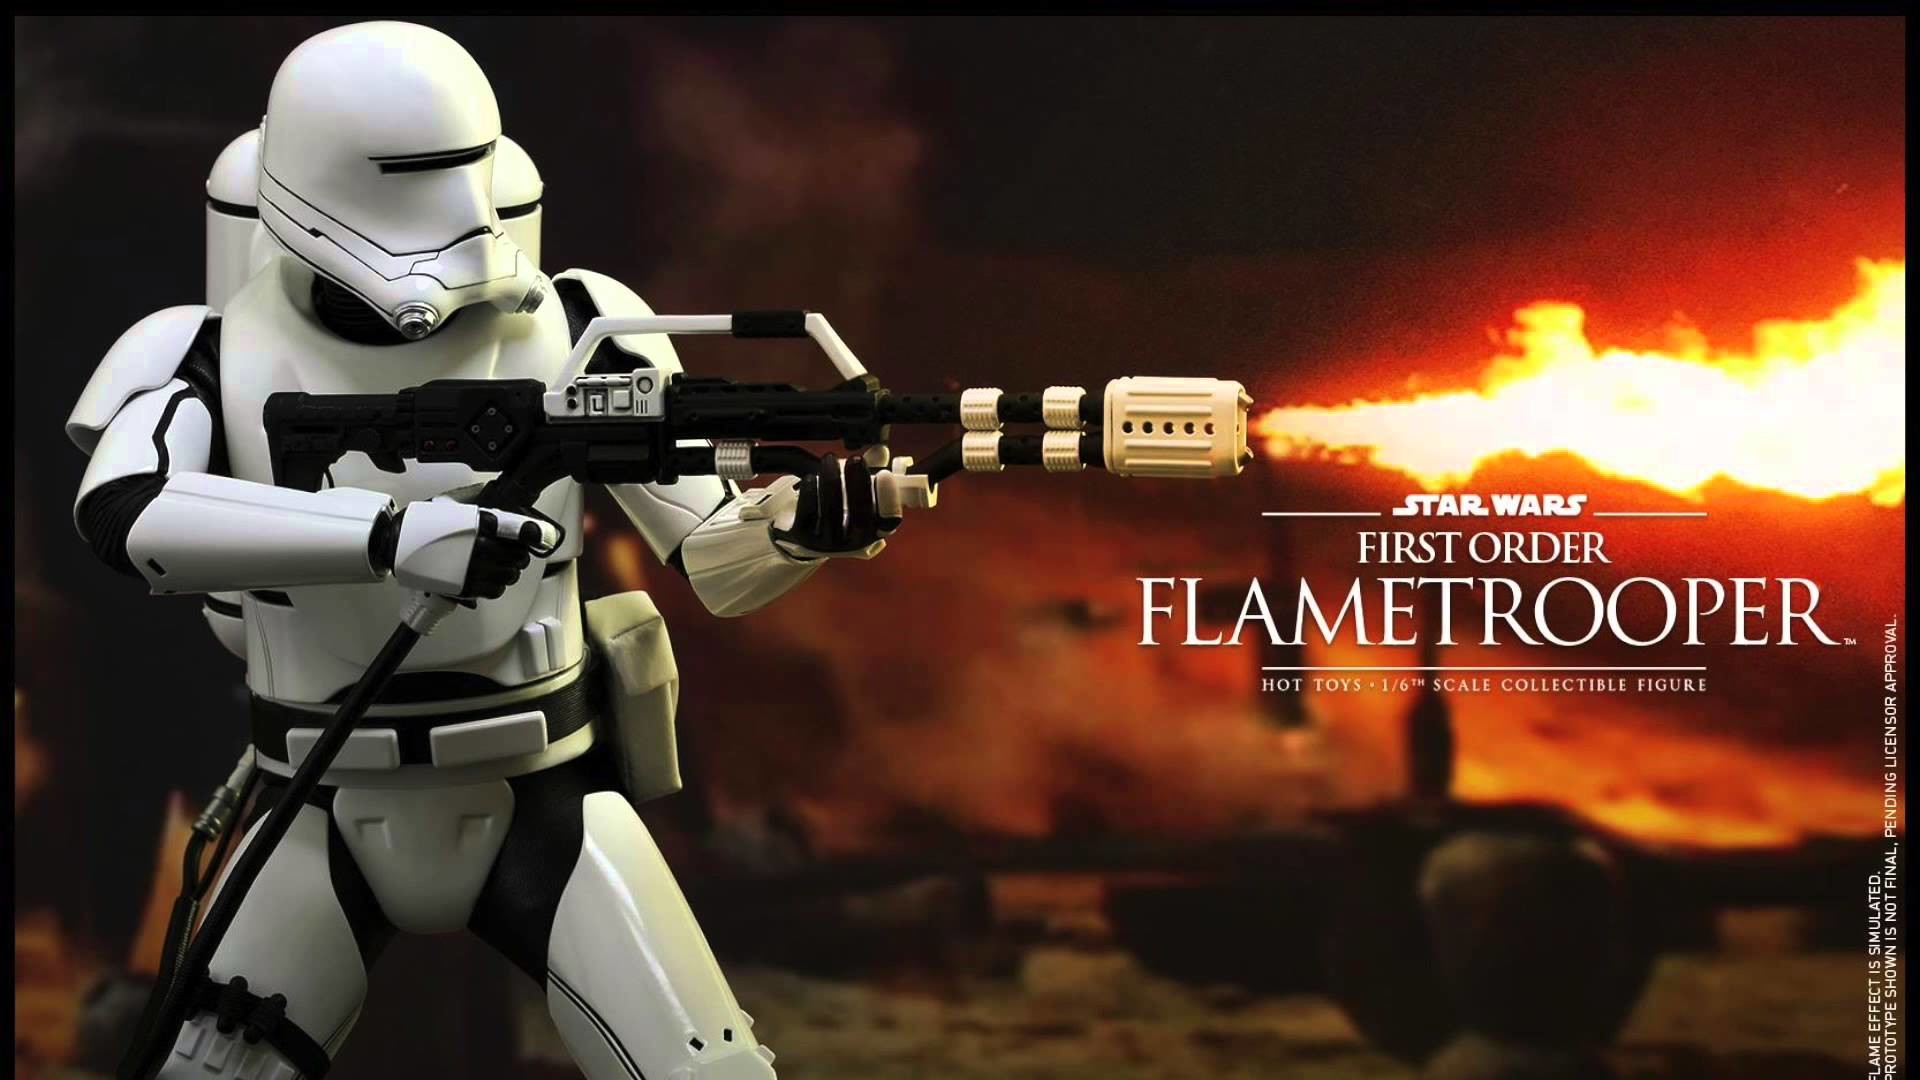 Star Wars The Force Awakens Hot Toys First Order Flametrooper 1 / 6 Scale Movie Figure Revealed – YouTube